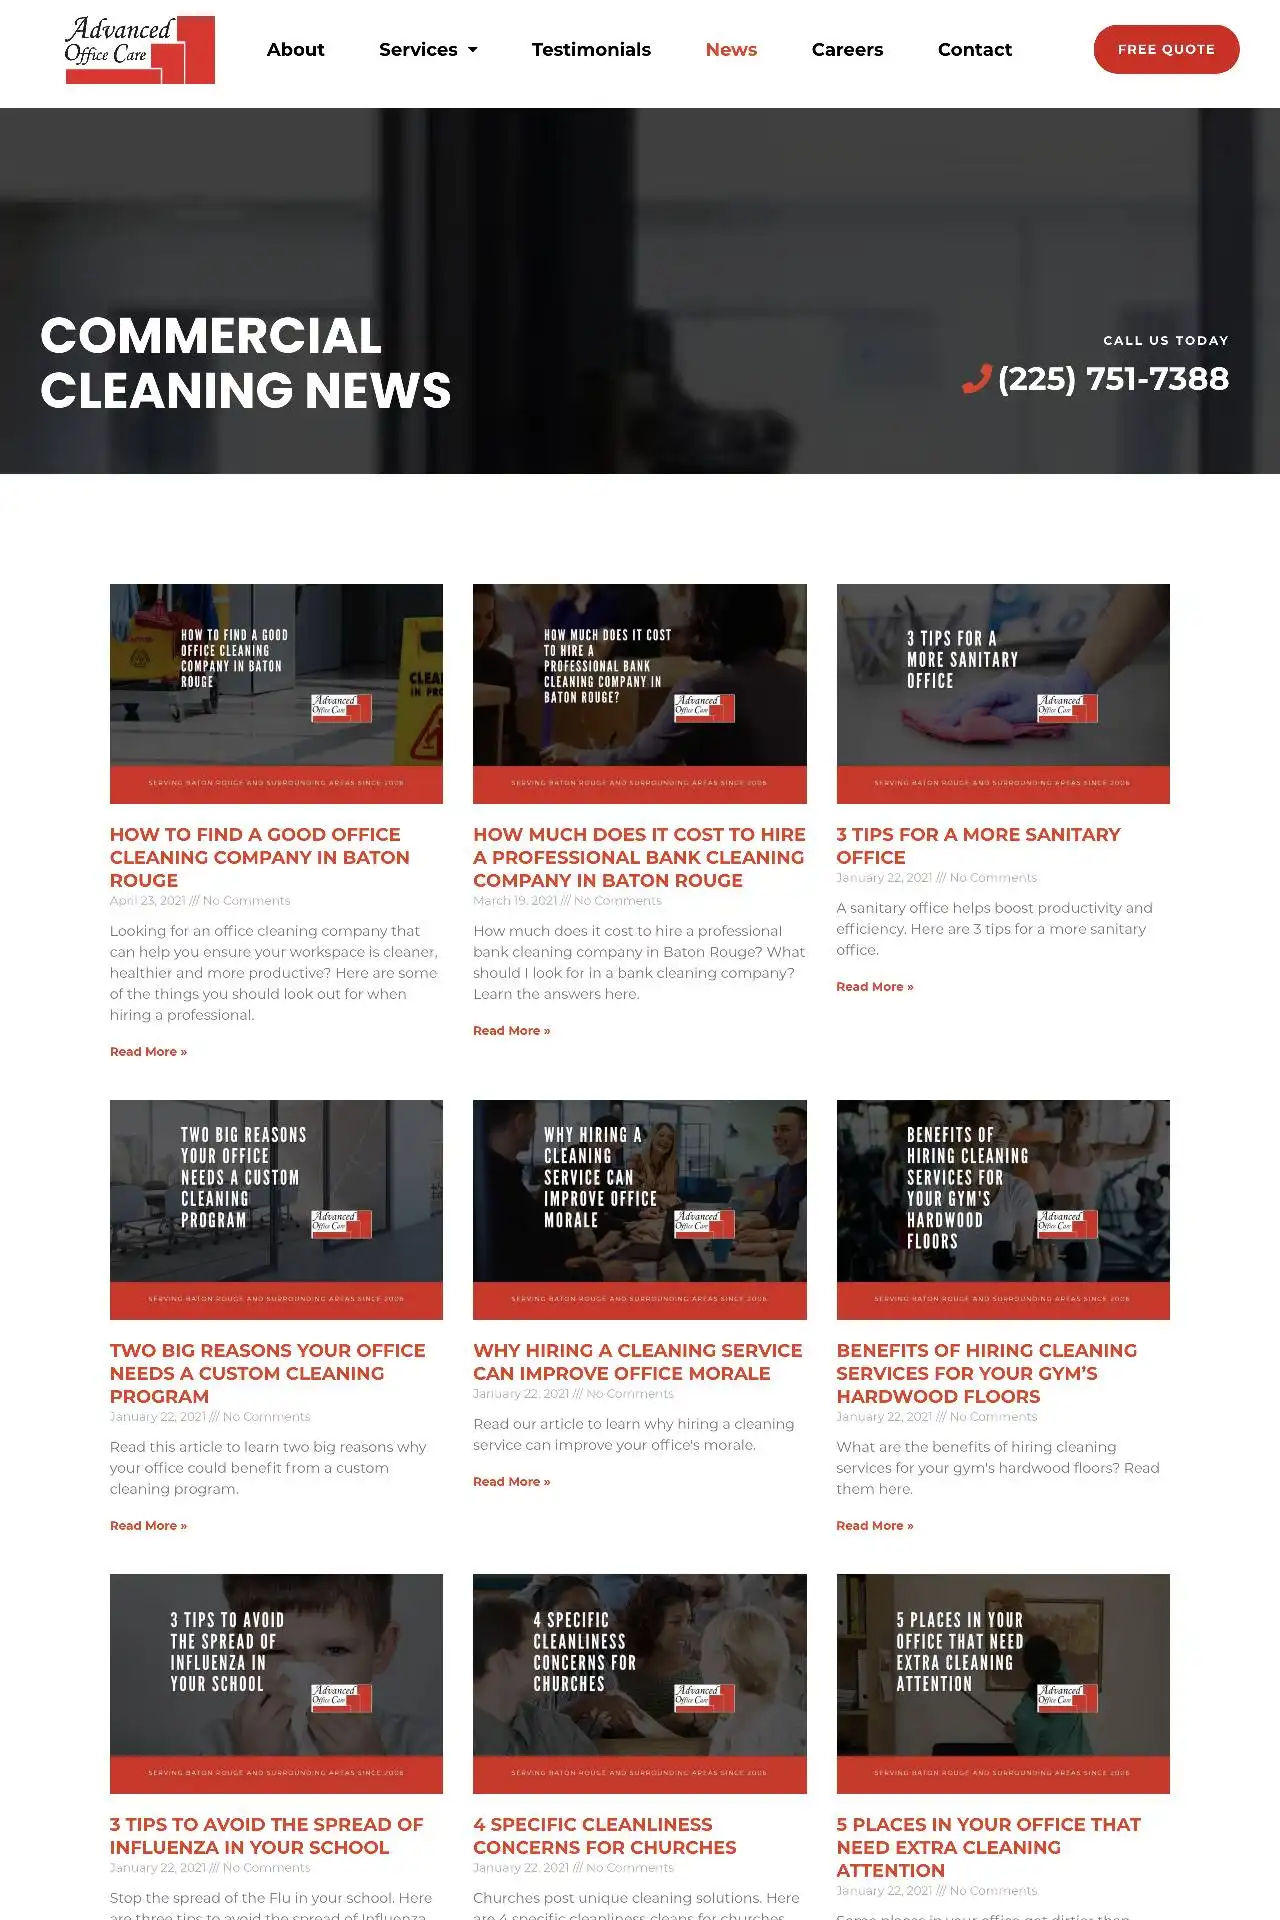 baton rouge cleaning company website design development https aocla.com commercial cleaning news